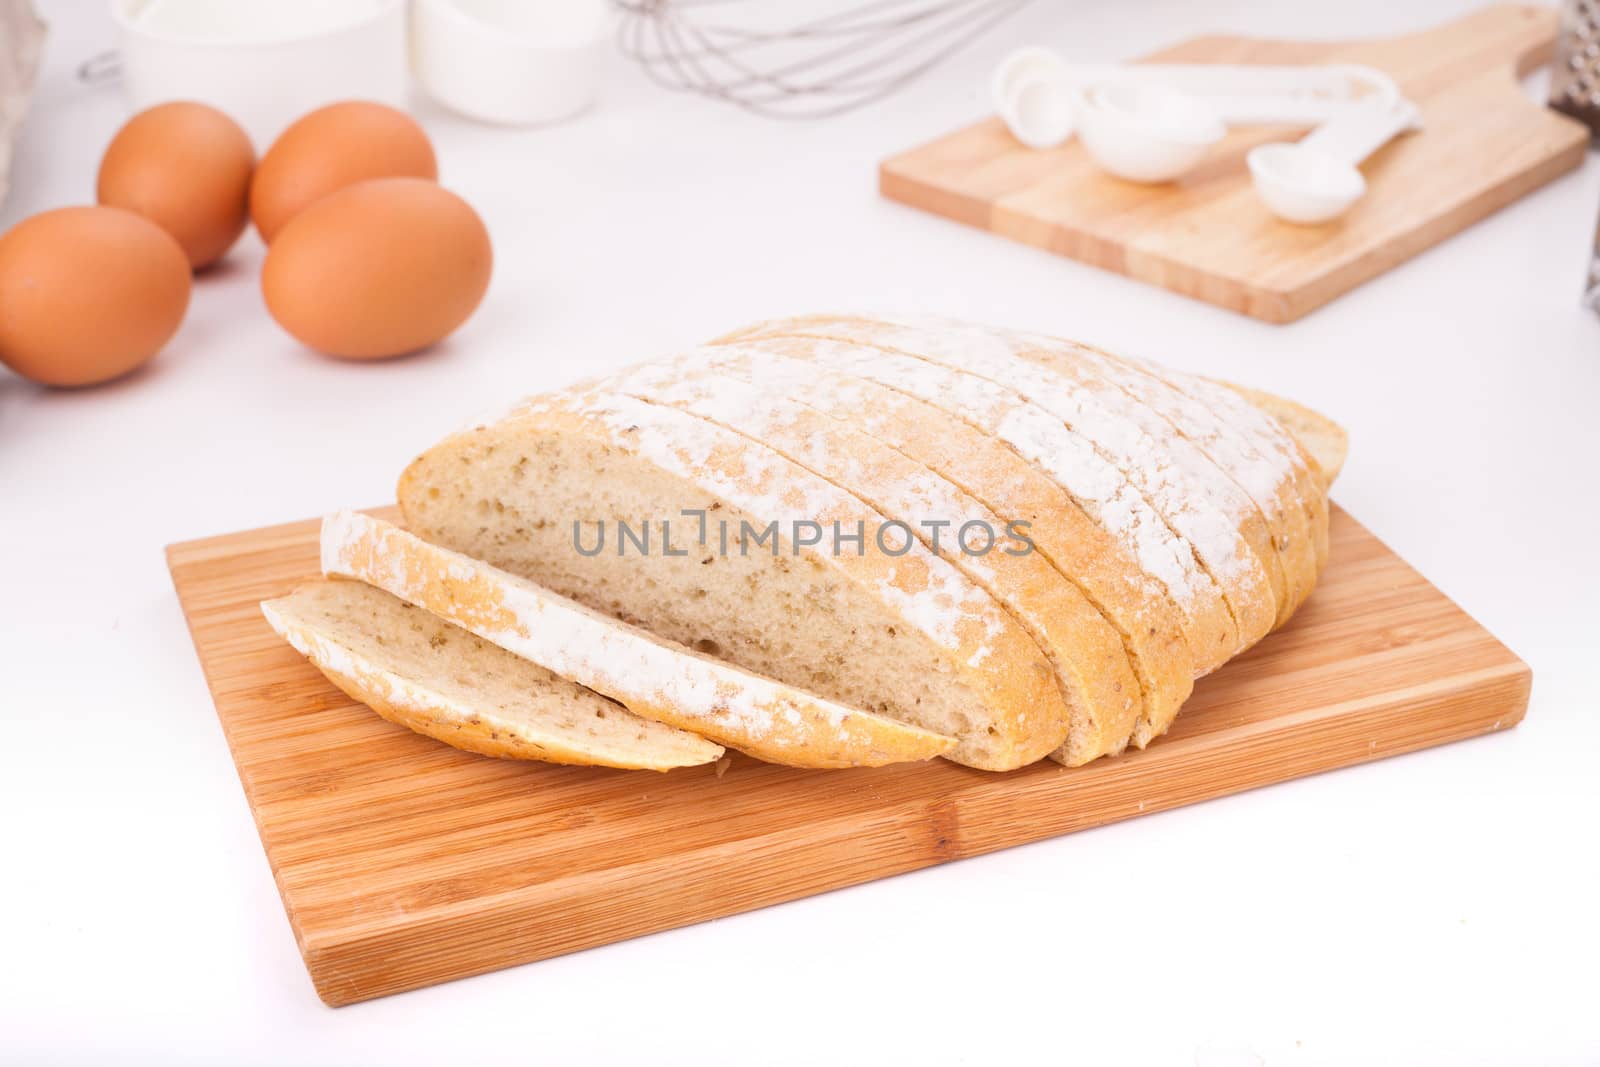 Fresh bread, cut into strips Placed on the table along with equipment for the bakery.